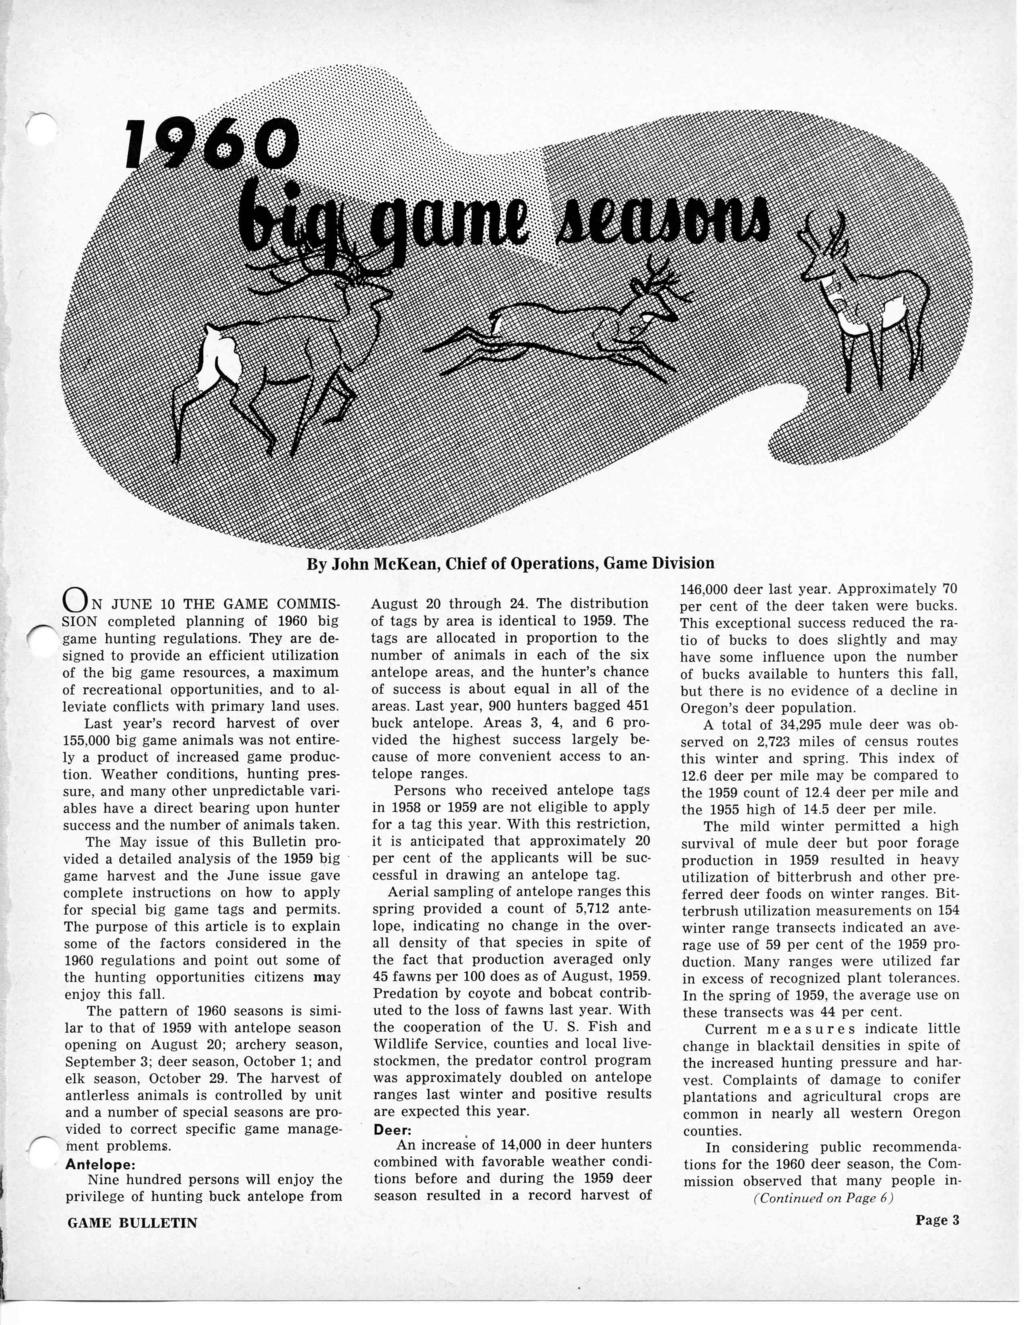 O N JUNE 10 THE GAME COMMIS- SION completed planning of 1960 big game hunting regulations.